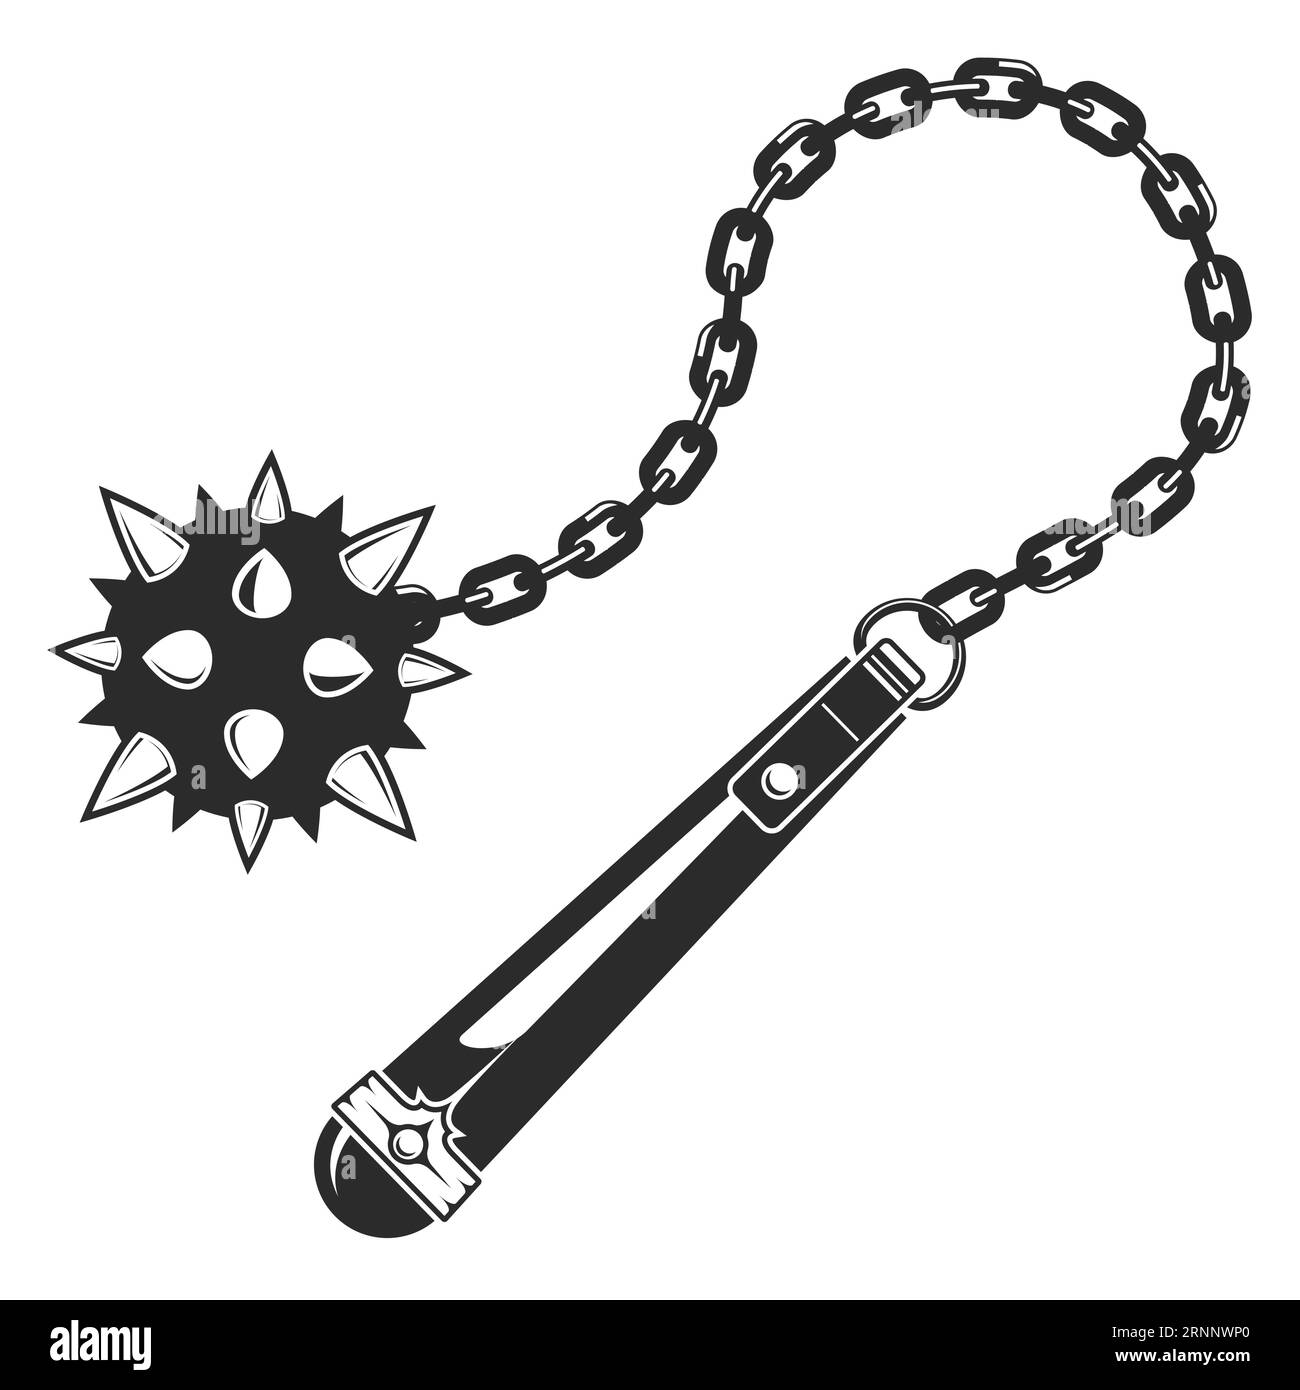 Morgenstern weapon, medieval mace, ball with spikes on chain of wooden handle, vector Stock Vector